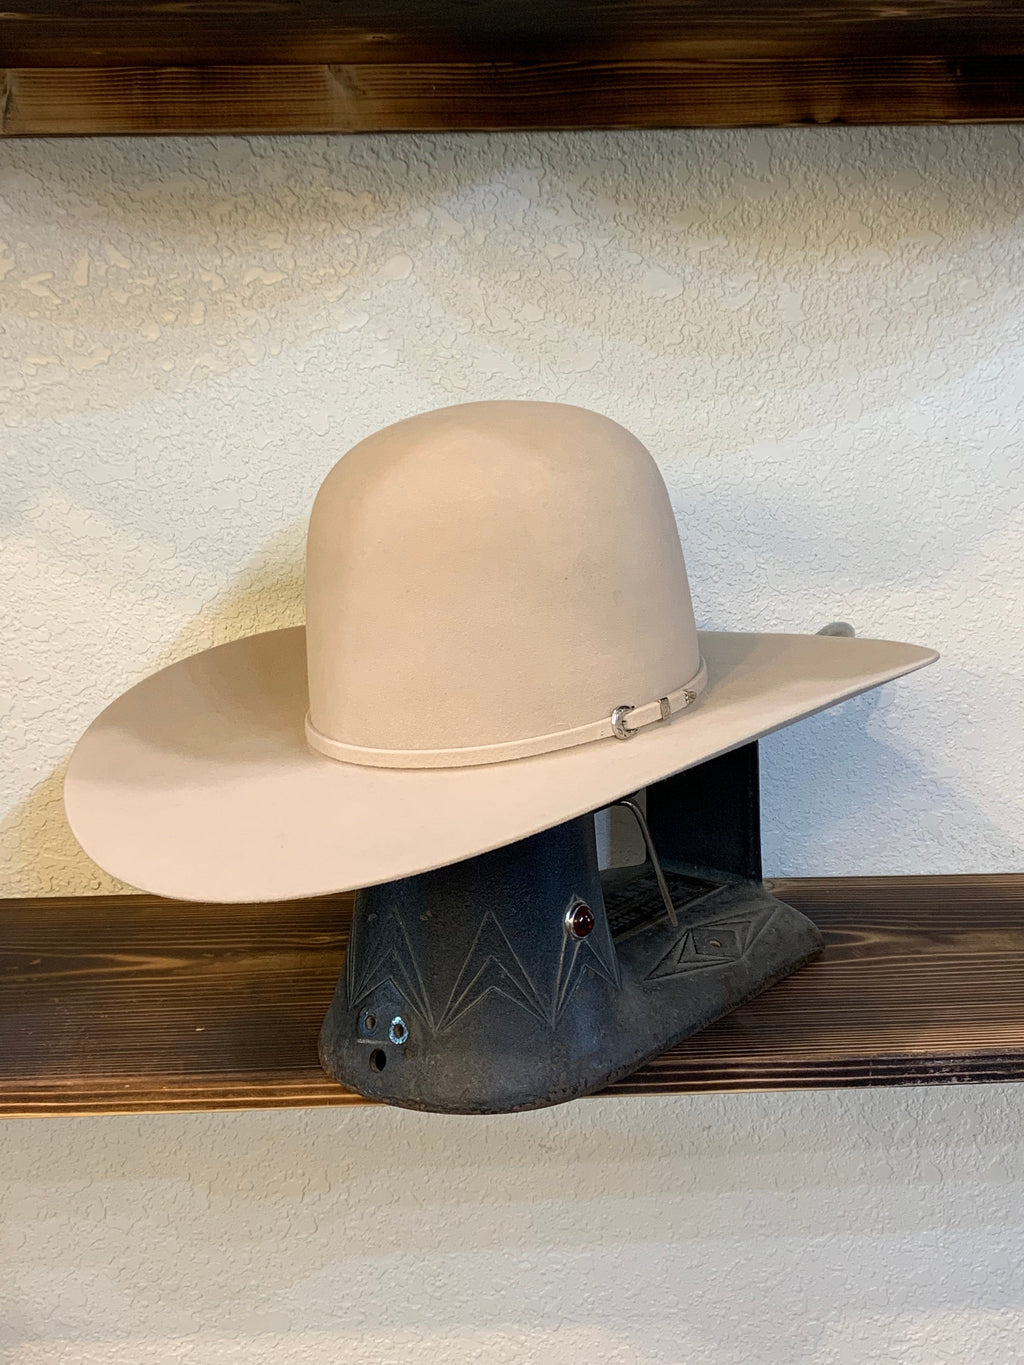 Learn about custom cowboy hat shaping at the D Bar M Western Store